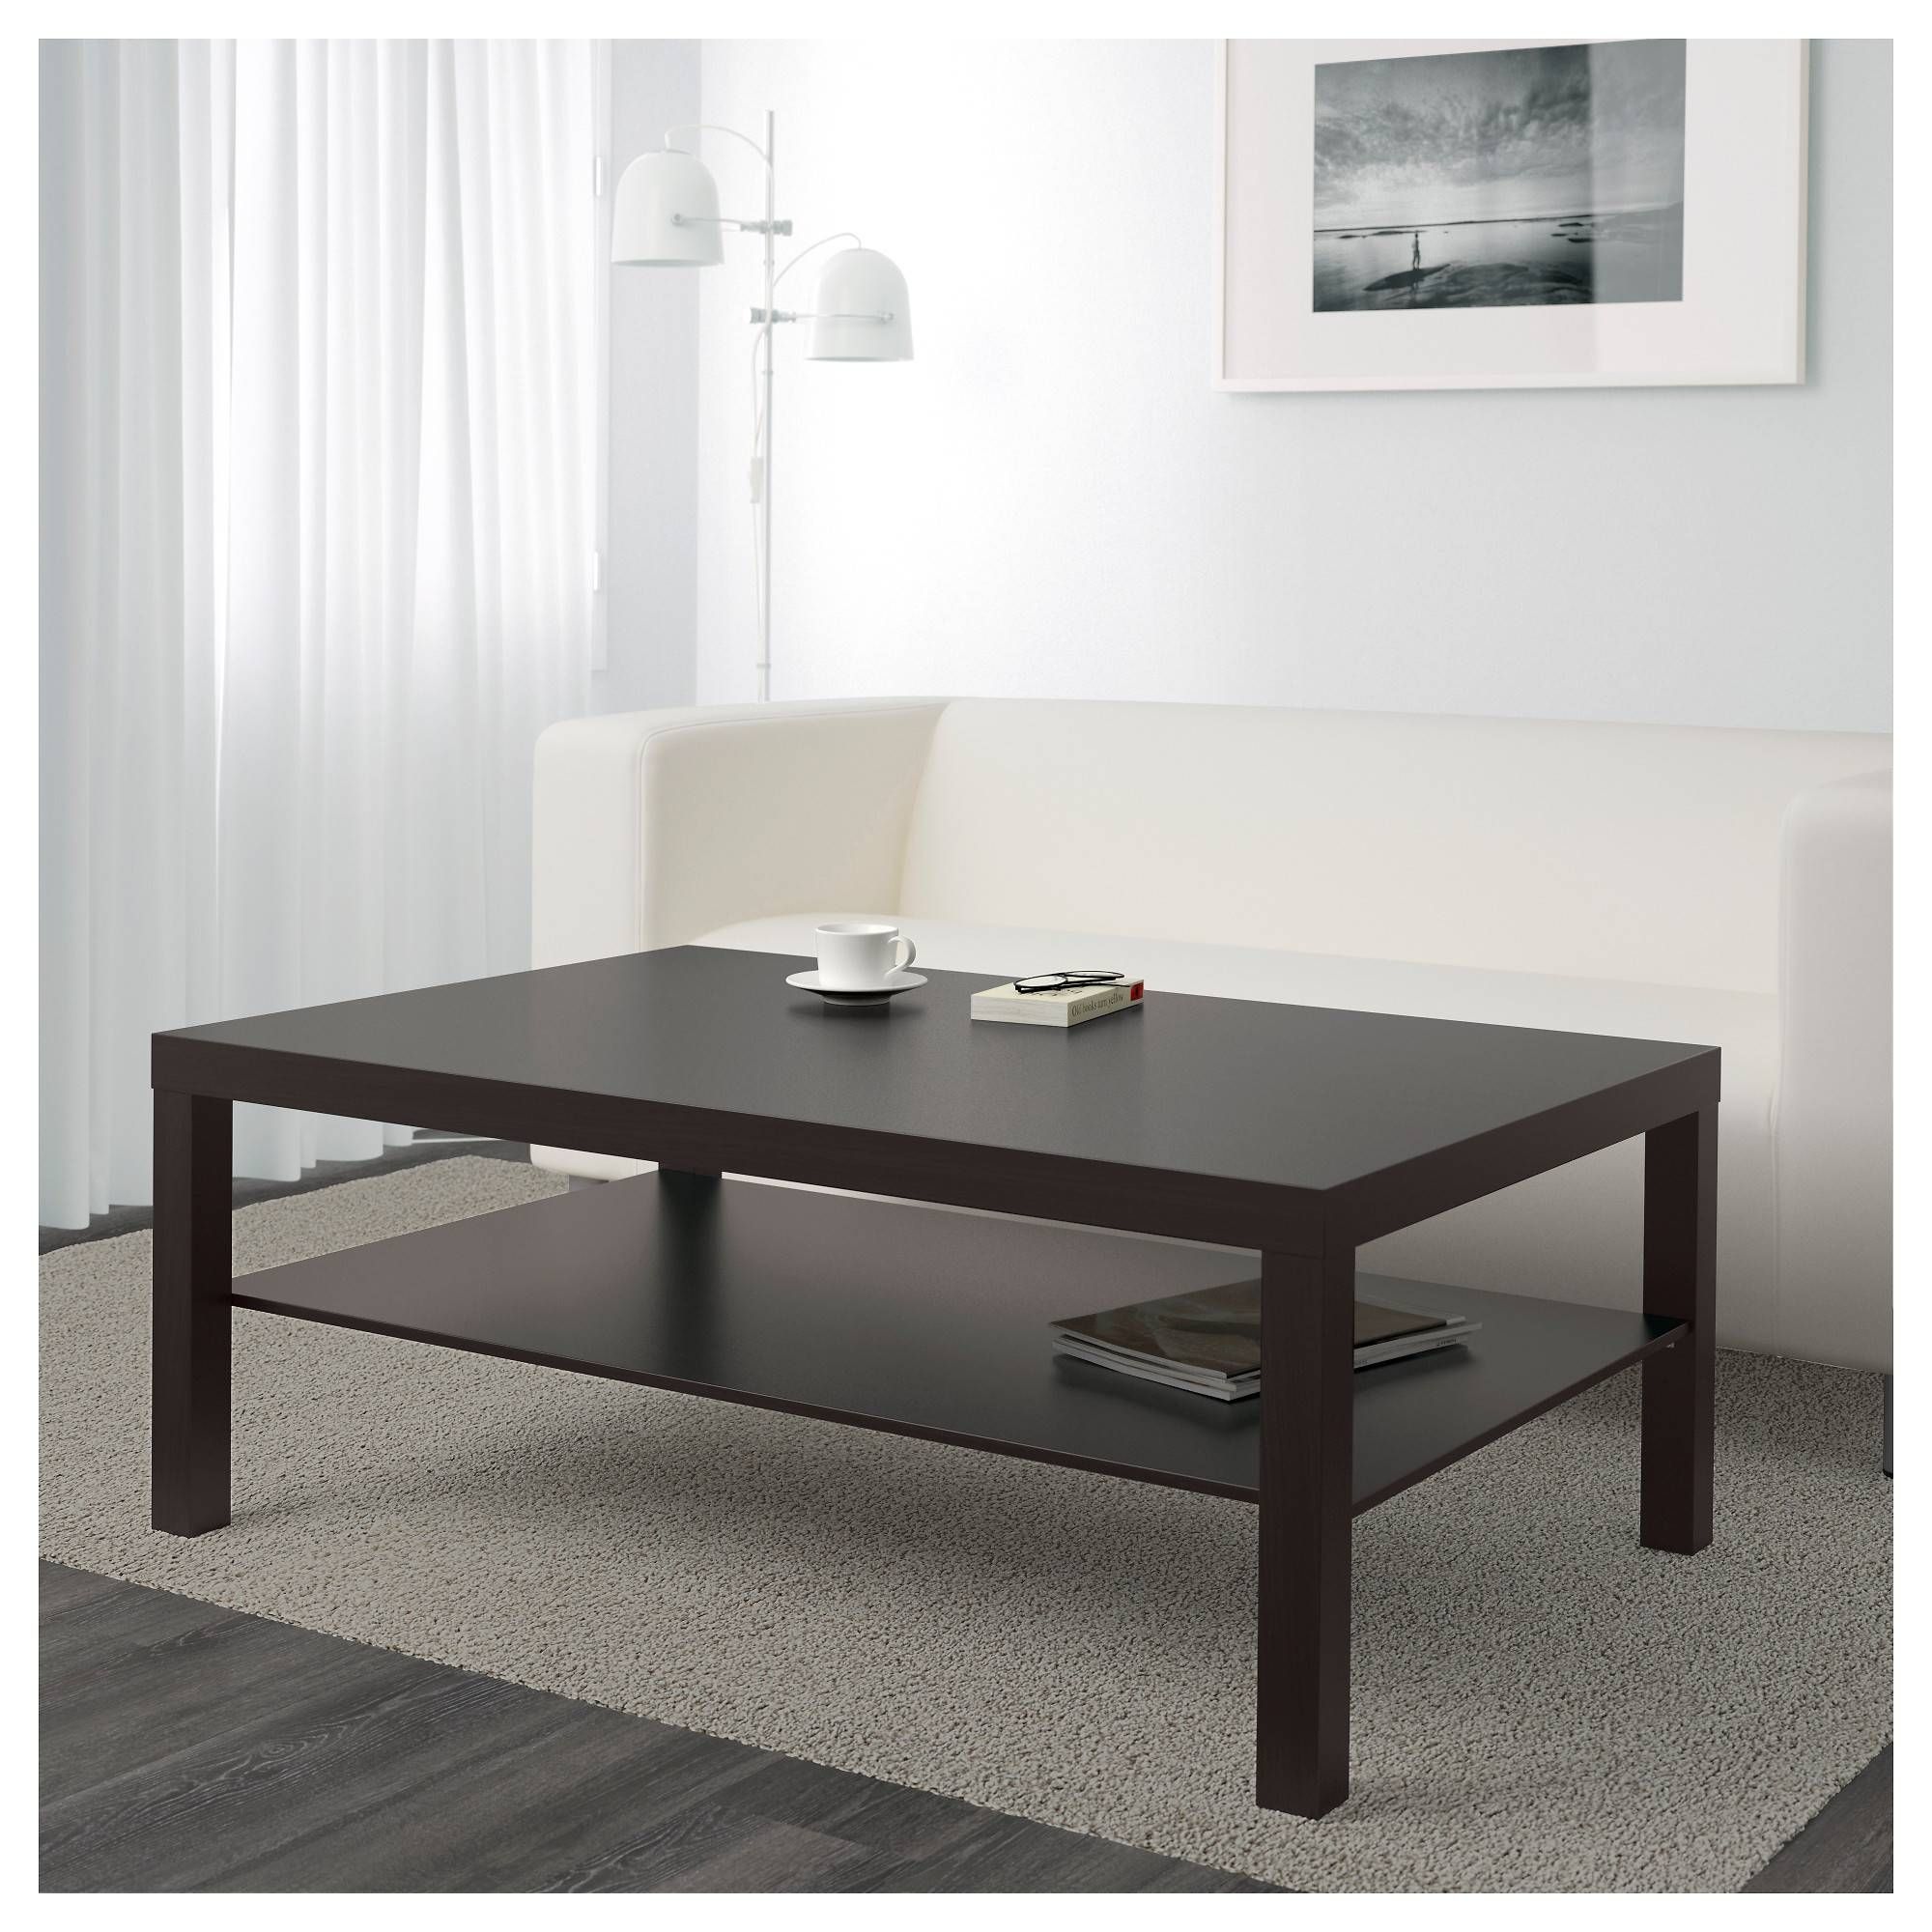 Lack Coffee Table – Black Brown – Ikea Intended For Dark Brown Coffee Tables (View 7 of 30)